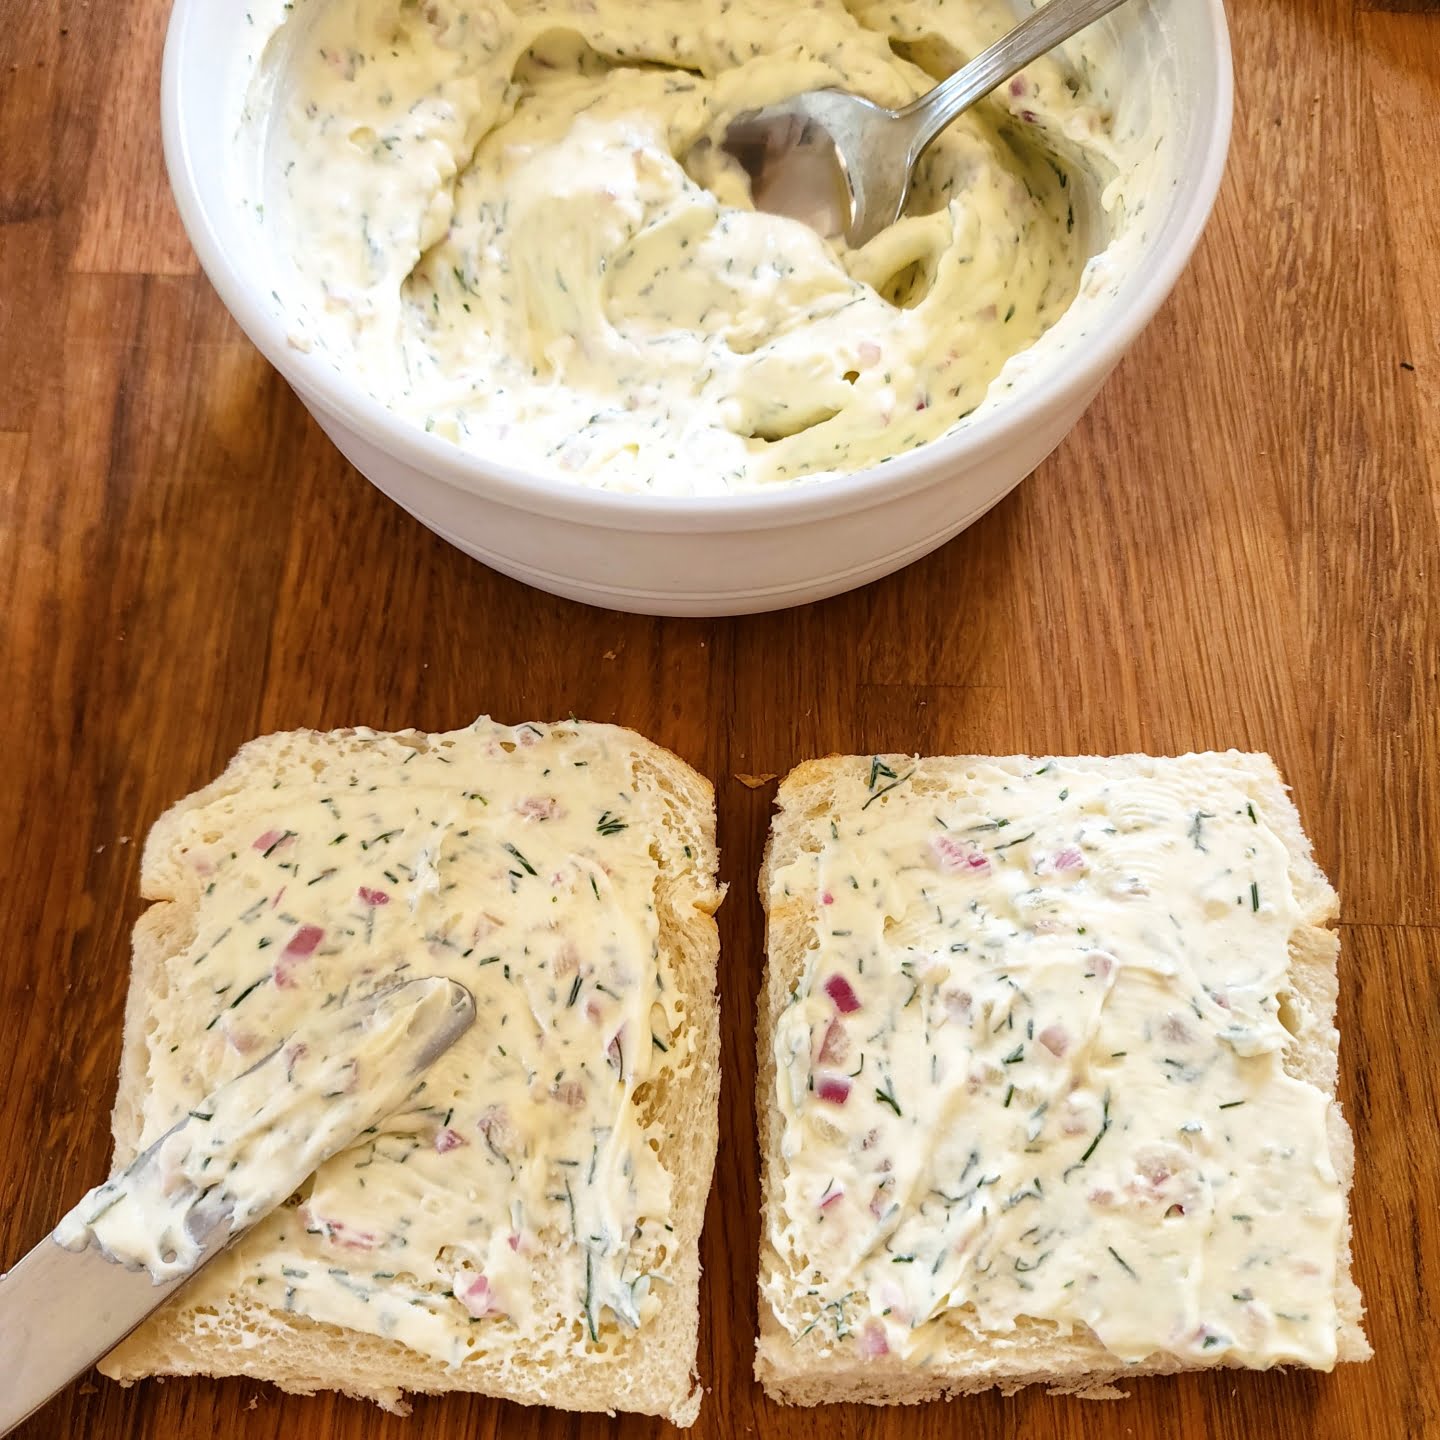 Spreading cream cheese on top of bread